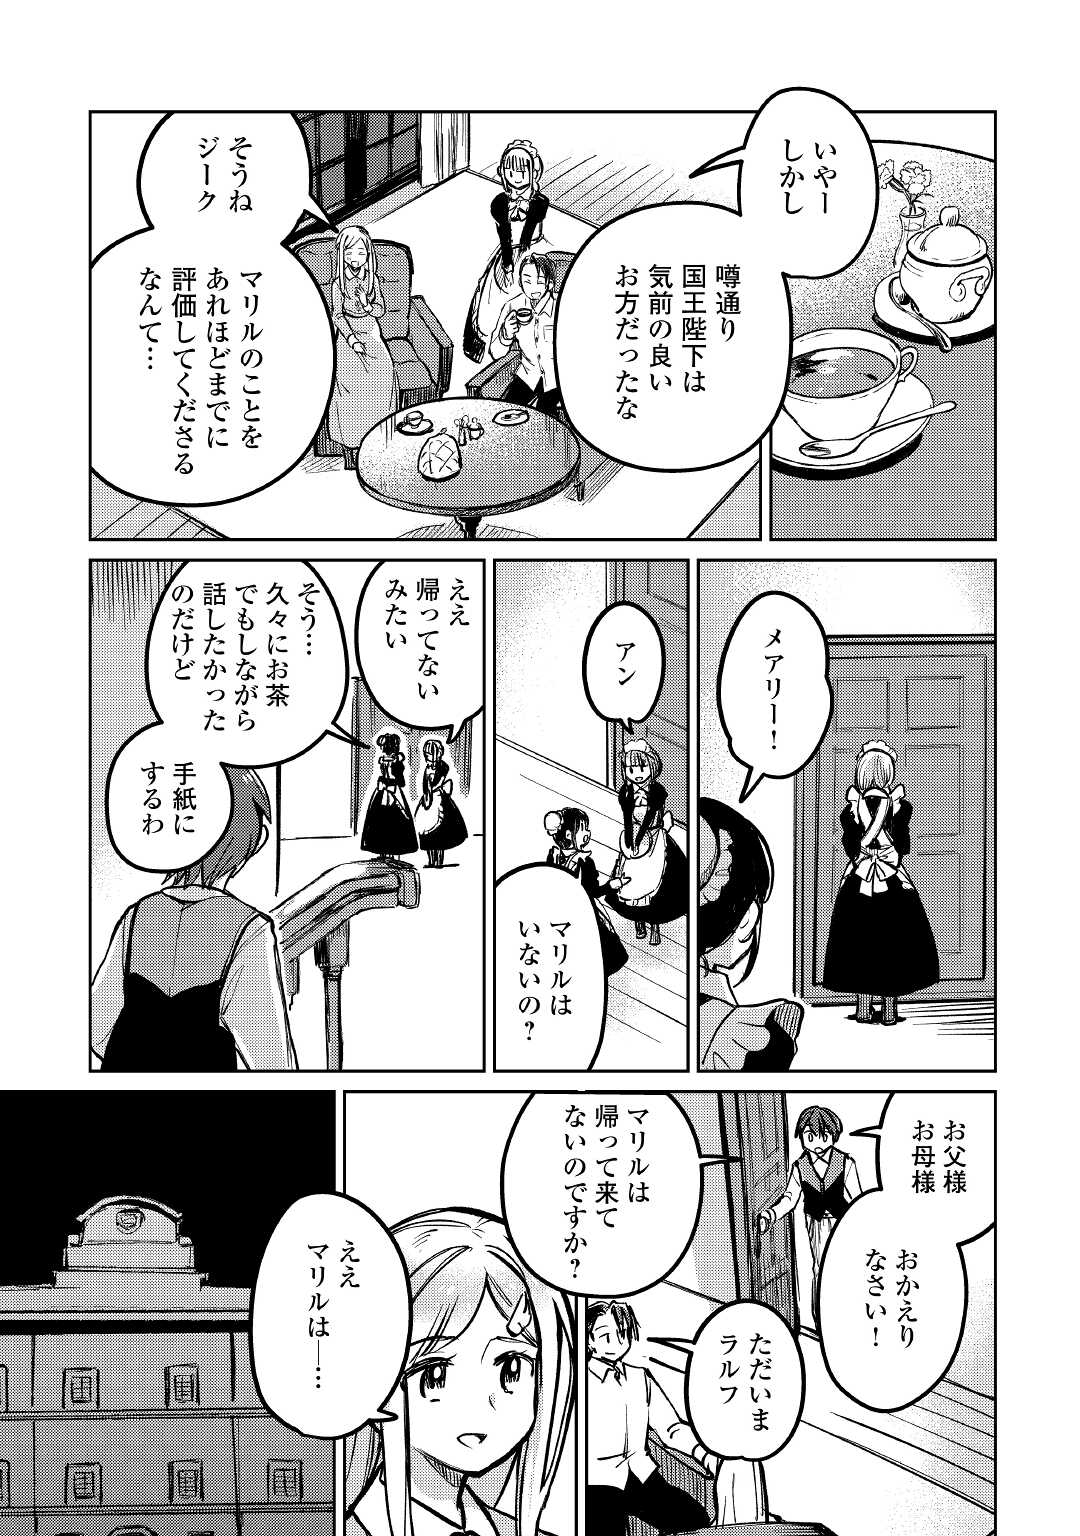 The Former Structural Researcher’s Story of Otherworldly Adventure 第37話 - Page 17